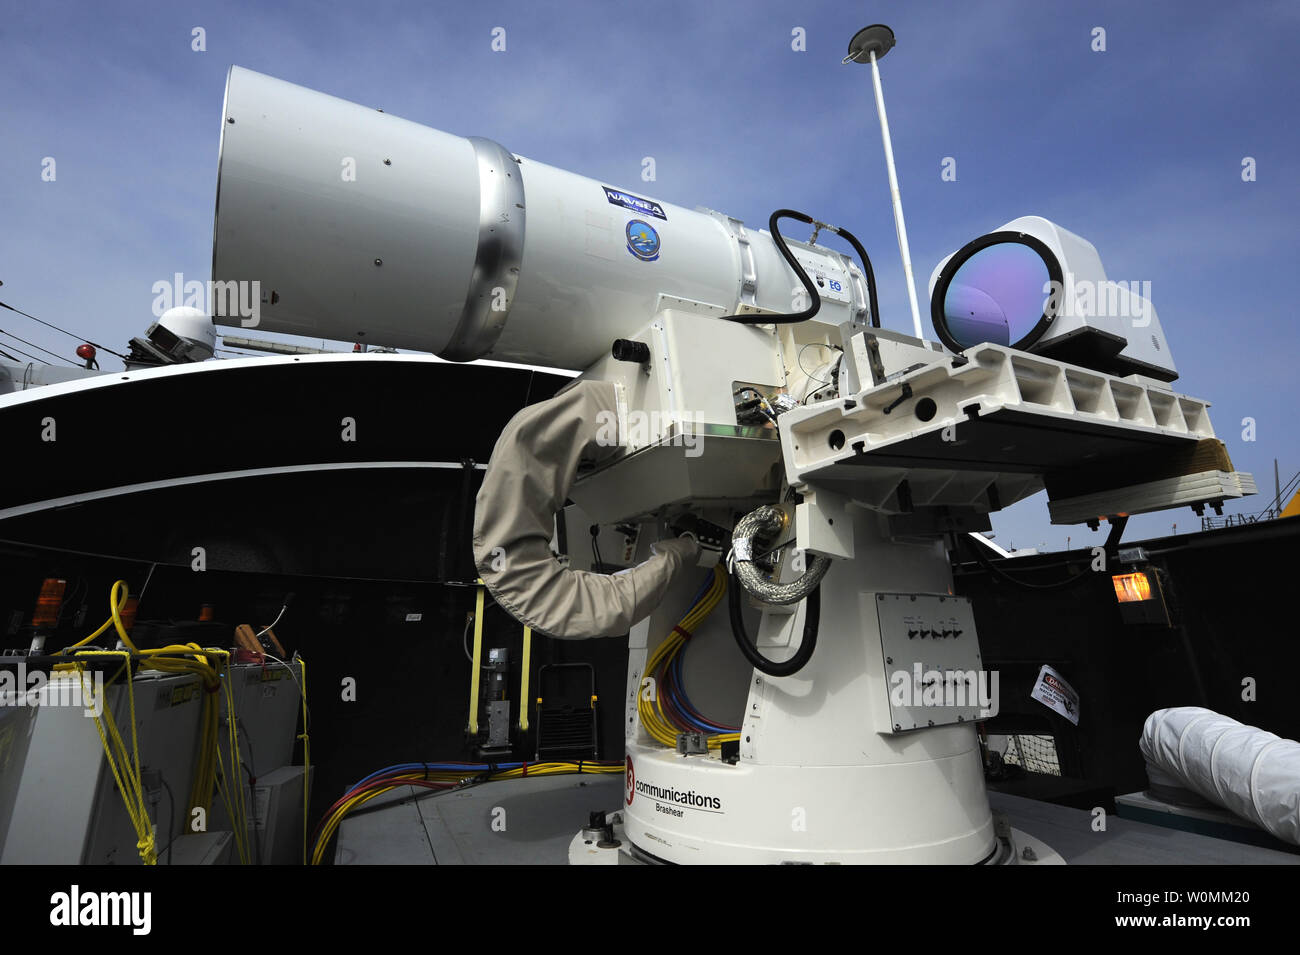 The Laser Weapon System (LaWS) is temporarily installed aboard the guided-missile destroyer USS Dewey (DDG 105) in San Diego, California, July 2012. The U.S. Navy announced on April 8, 2013 that it will deploy for the first time one of its ships that could be used for shooting down drones and disabling vessels.  The prototype will be installed aboard the USS Ponce within the next year. The weapon runs on electricity so the cost is less than $1 per shot. UPI/John Williams/U.S.NAVY Stock Photo